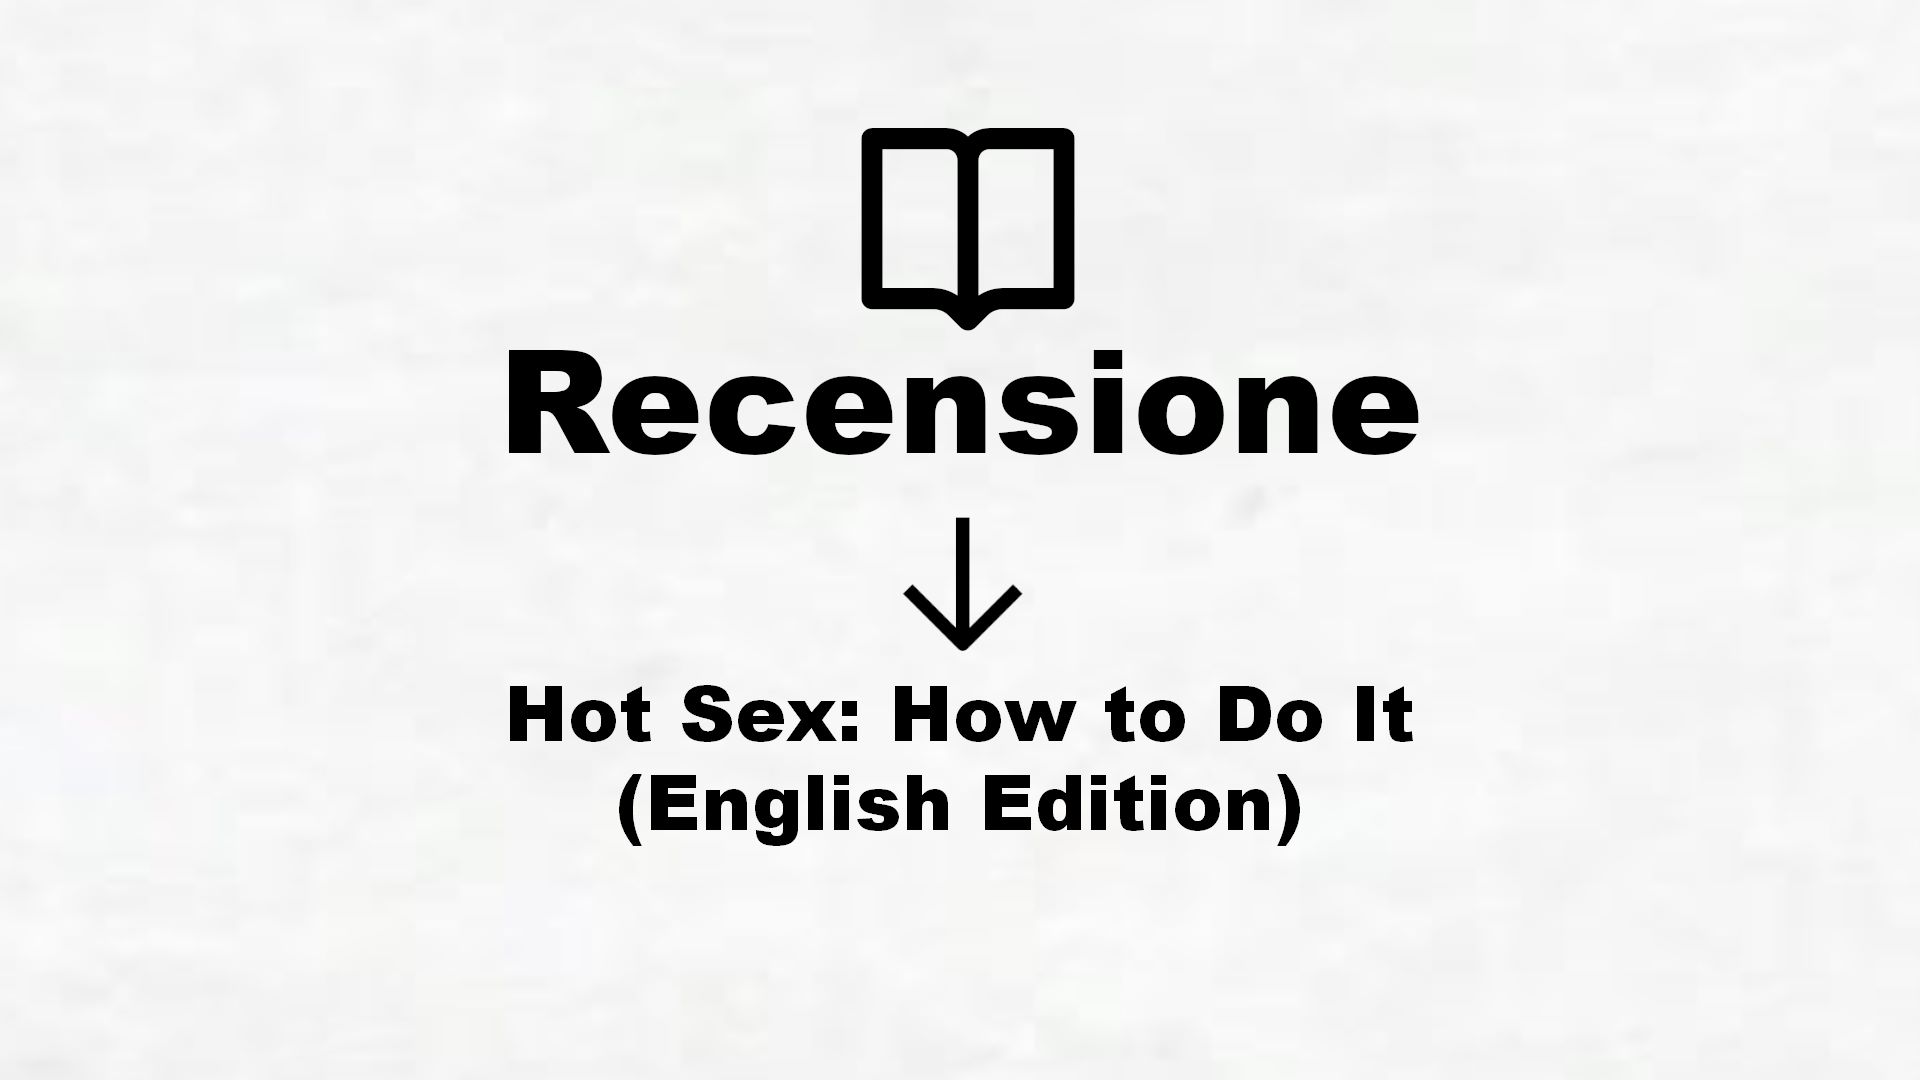 Hot Sex: How to Do It (English Edition) – Recensione Libro